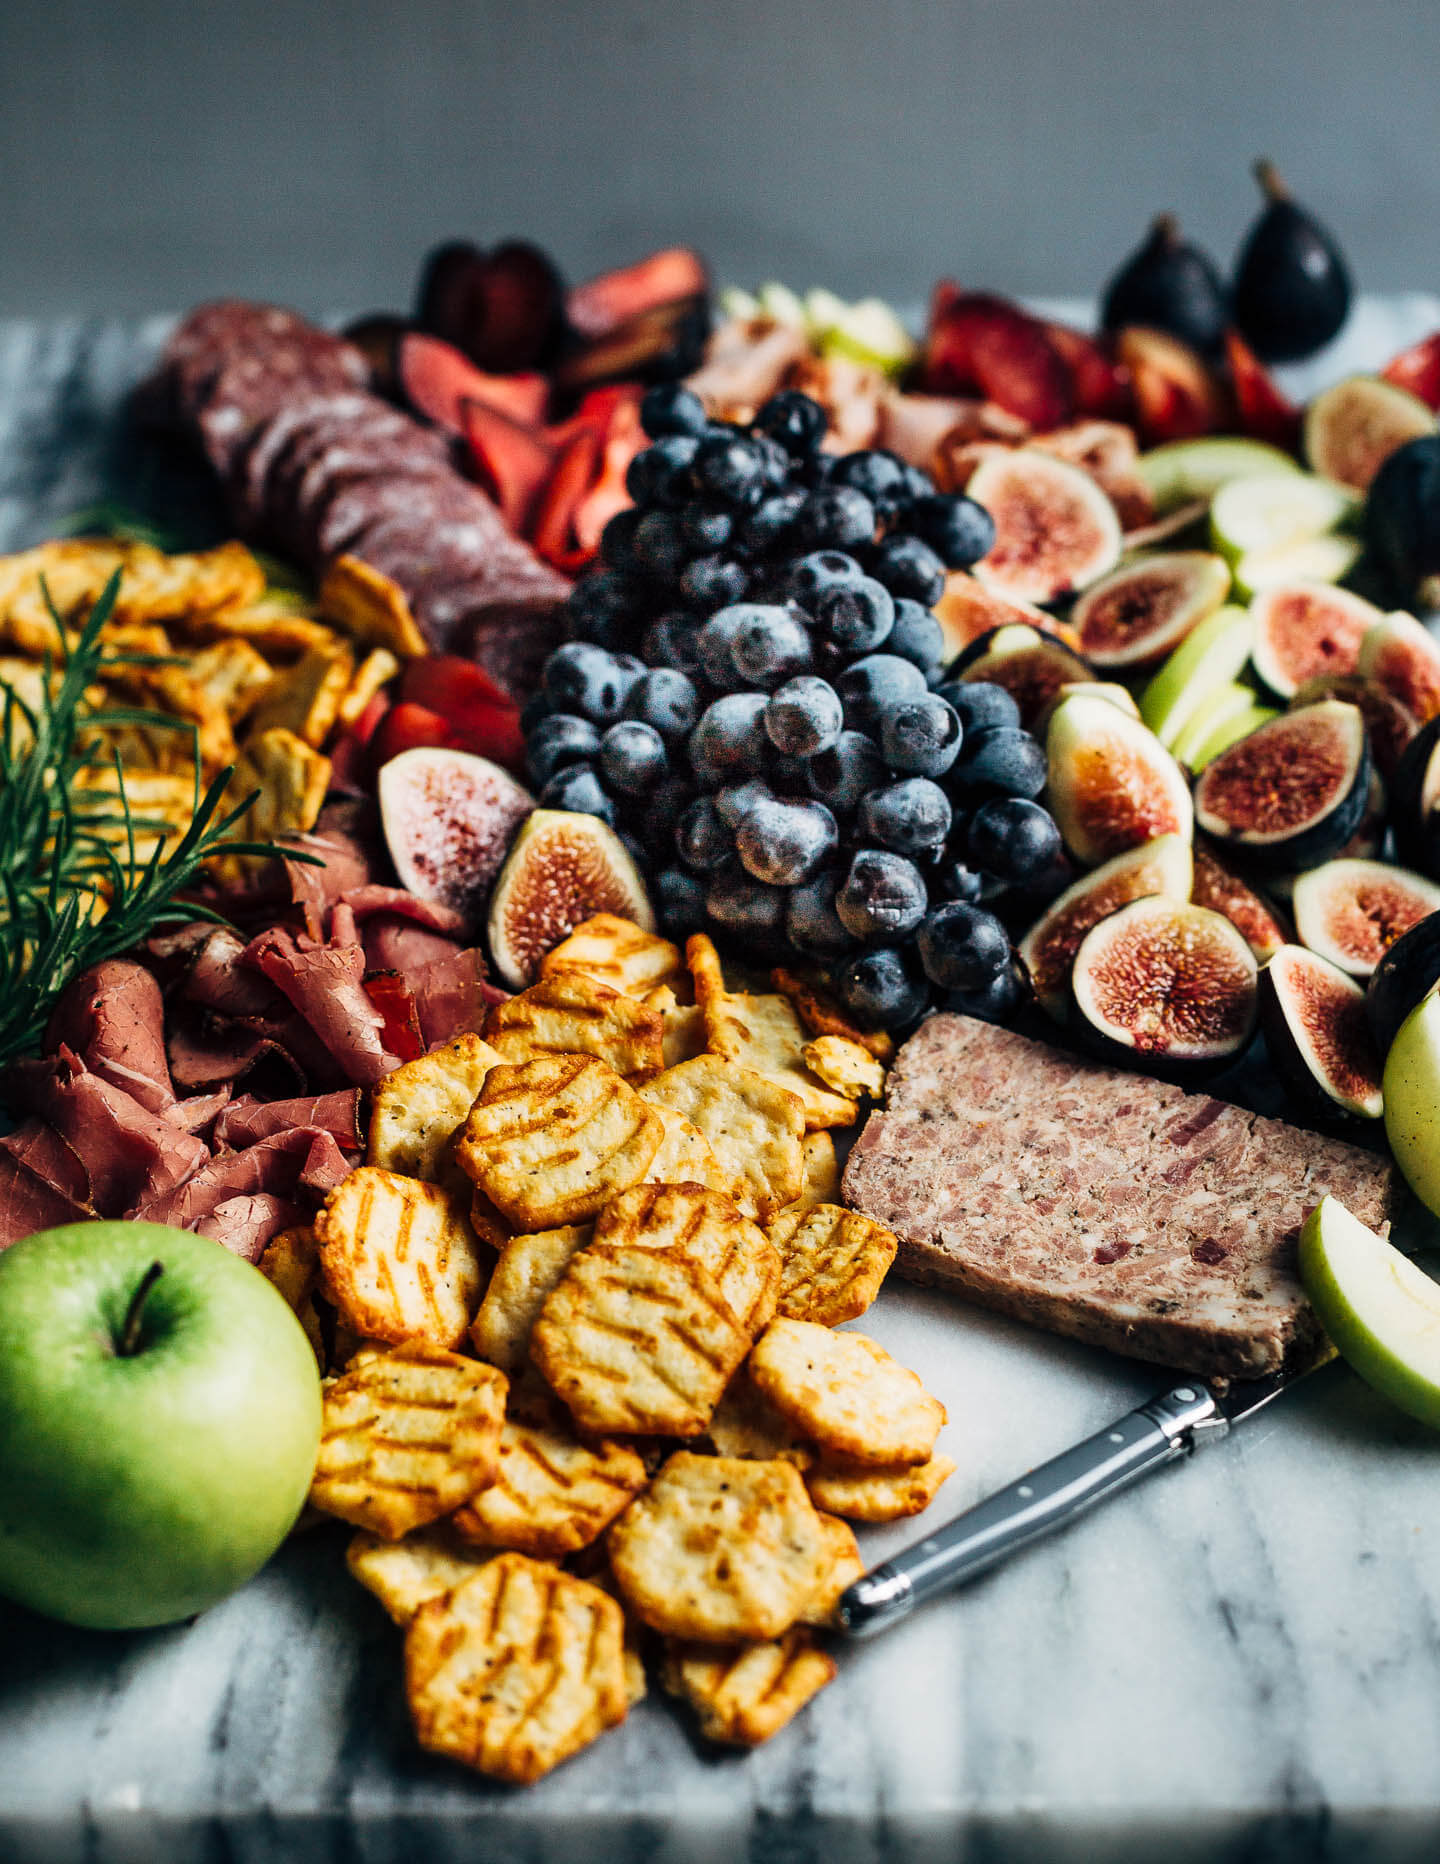 A creative charcuterie graze board that doubles as an eye-catching centerpiece for autumn gatherings. Featuring an assortment of meats, fresh fall fruit, and cheese crisps this charcuterie graze board comes together in minutes.